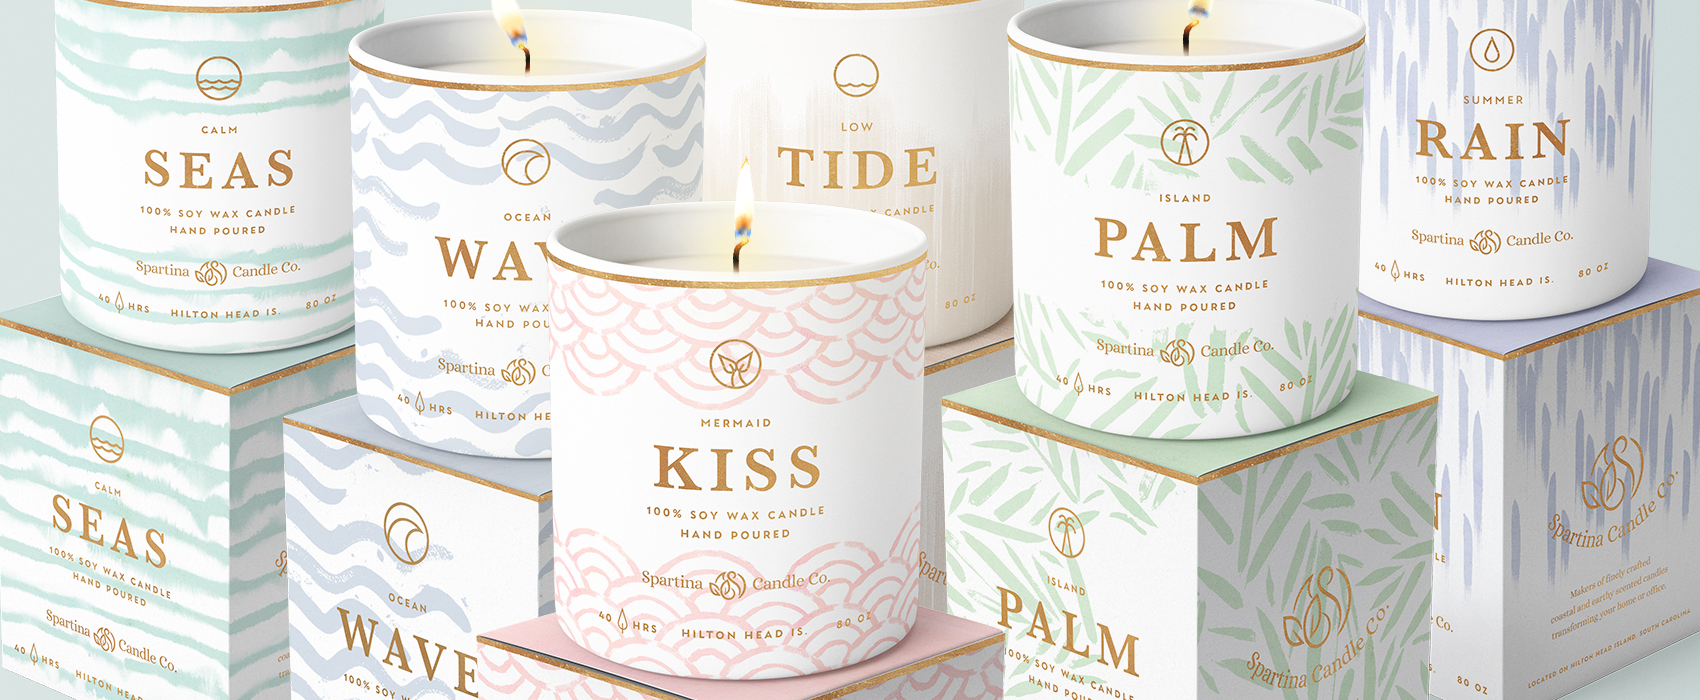 Lowcountry Candle Package Design